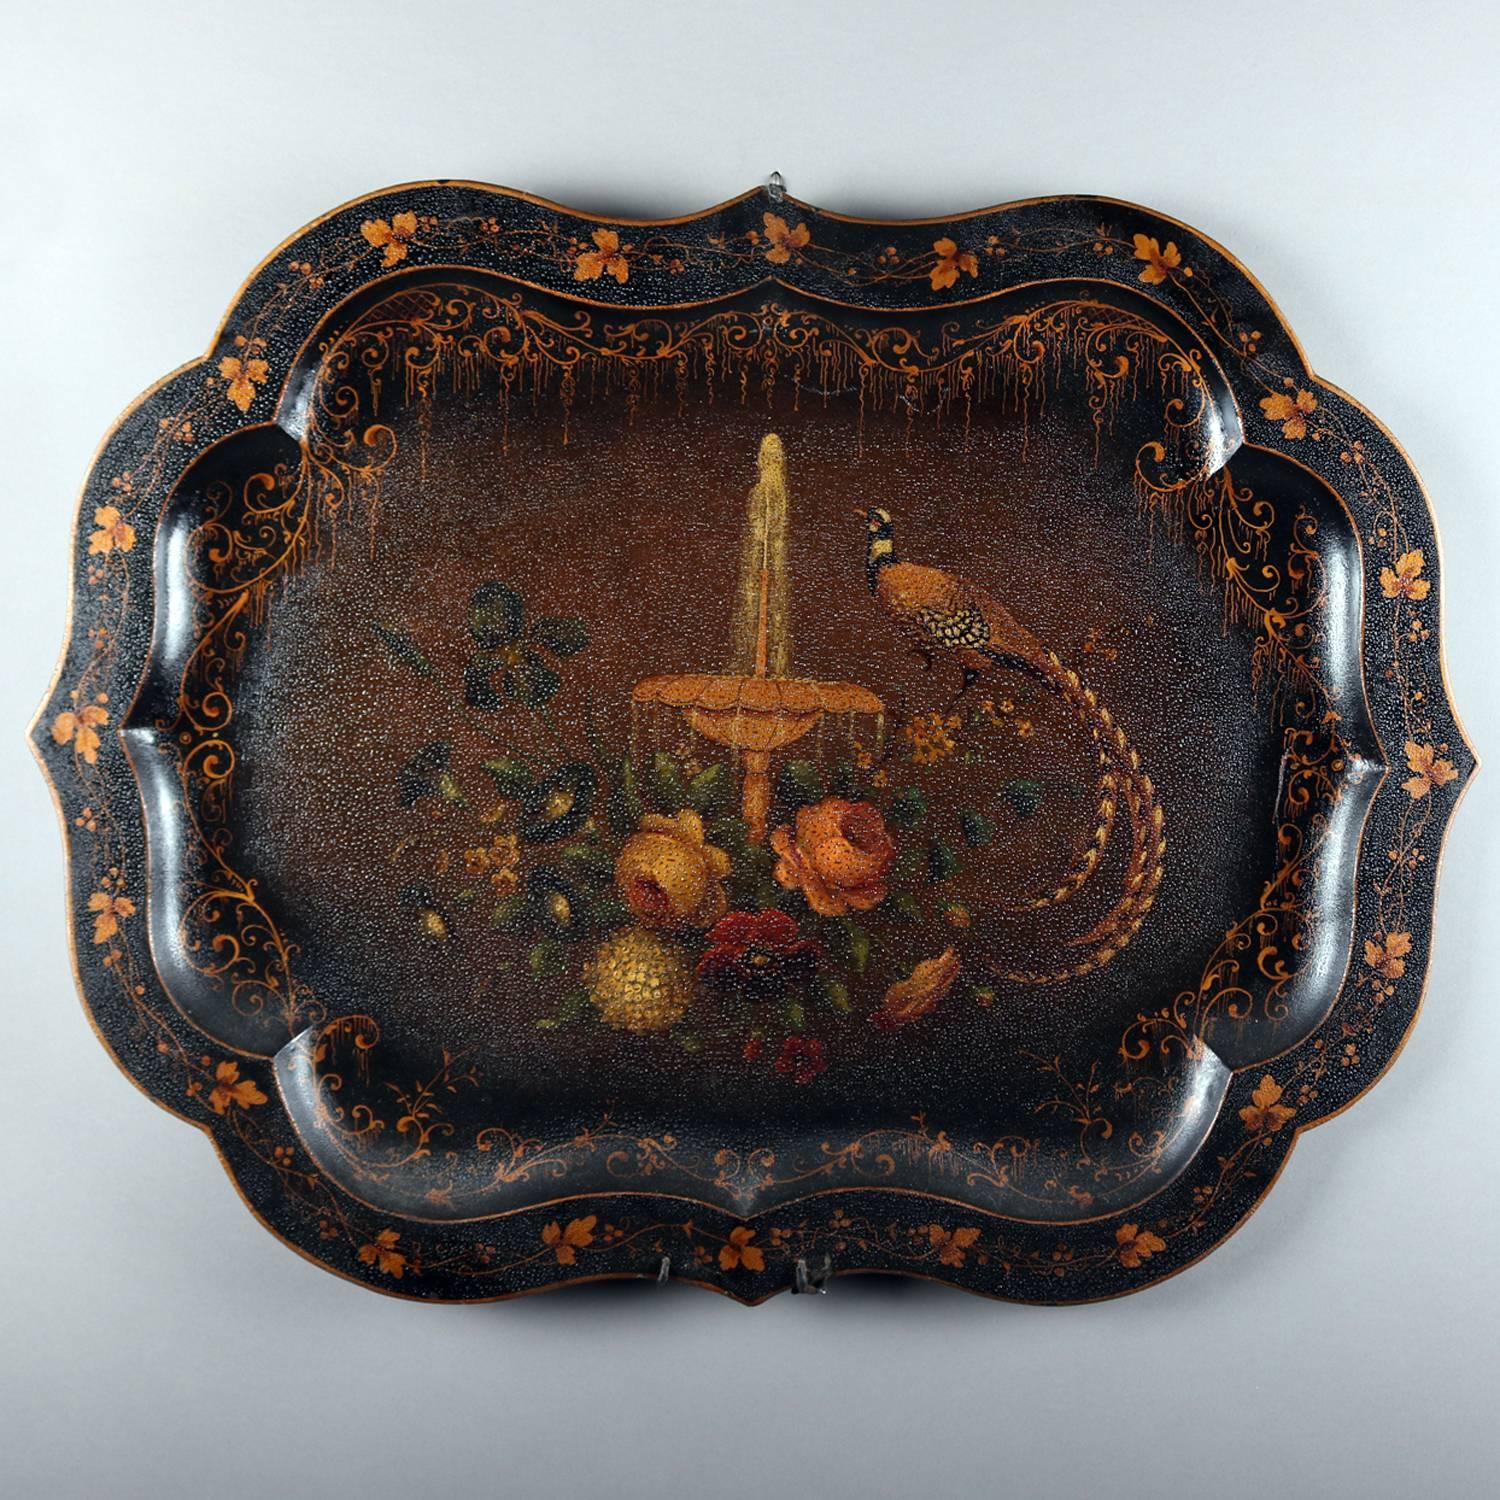 Antique Hand-Painted & Gilt Toleware Tray with Pheasant, Floral & Urn Decorated 3